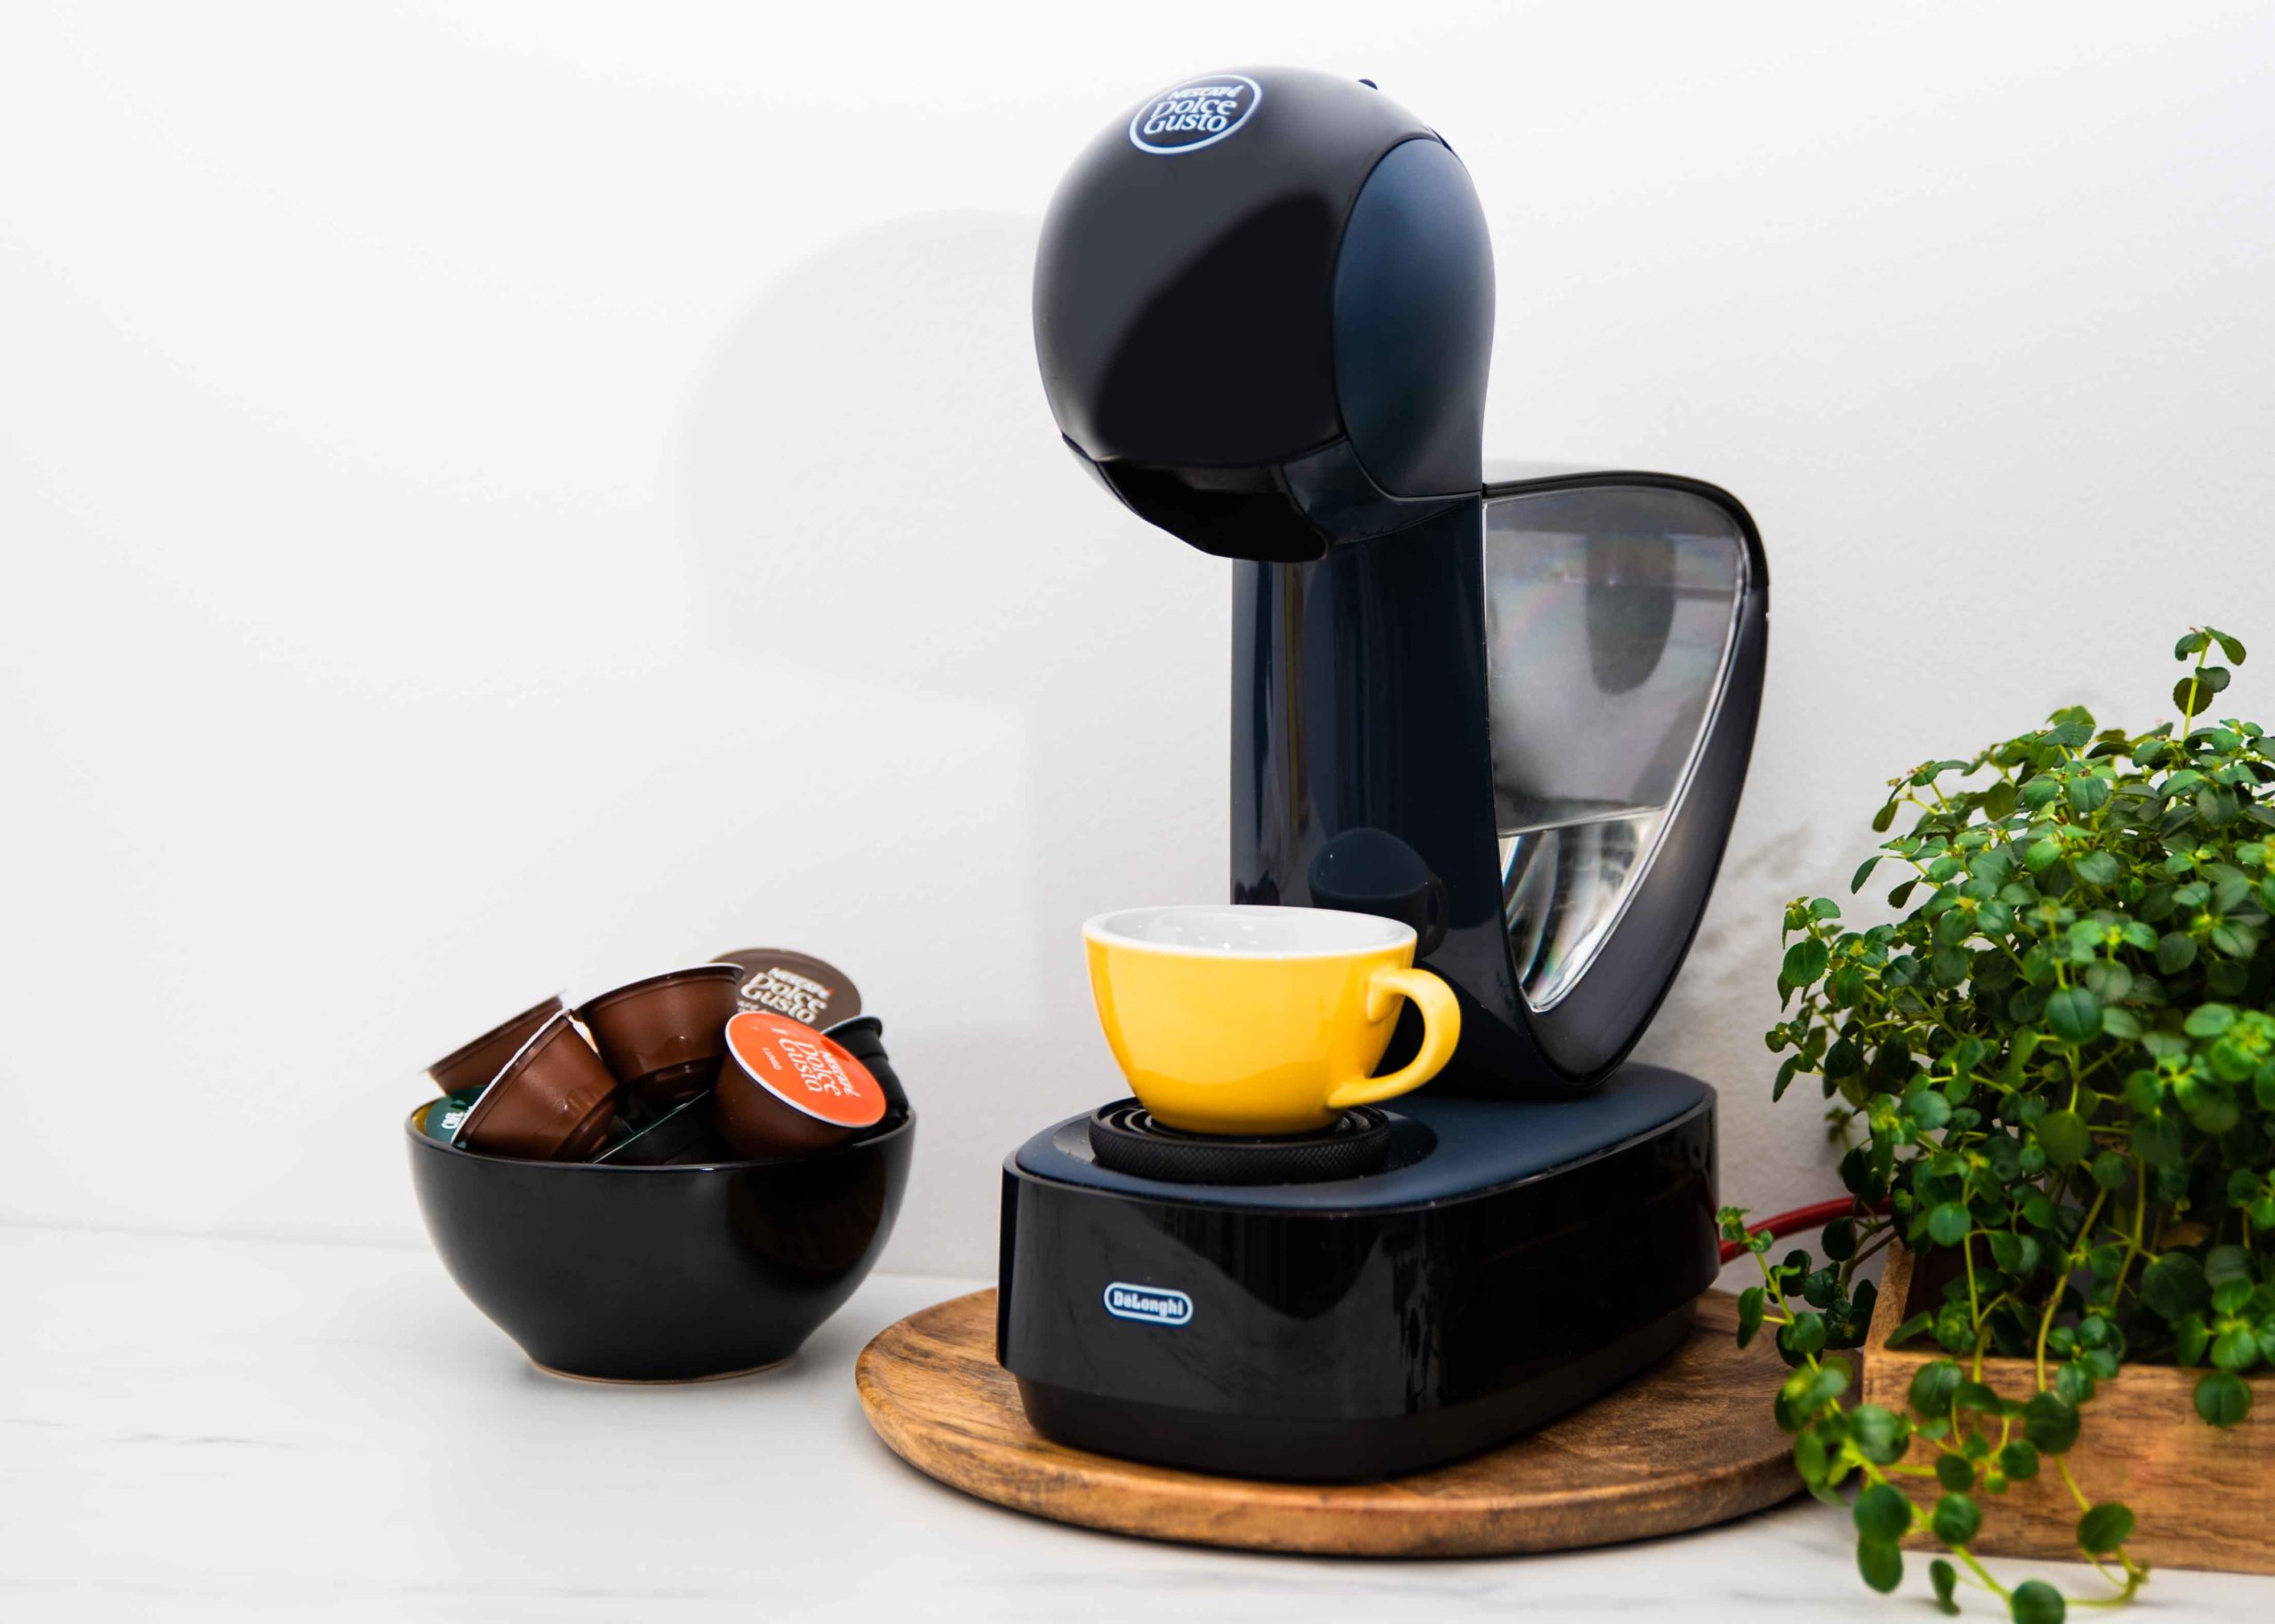 DOLCE GUSTO® KRUPS MINI ME REVIEW AFTER 3 MONTHS OF USE